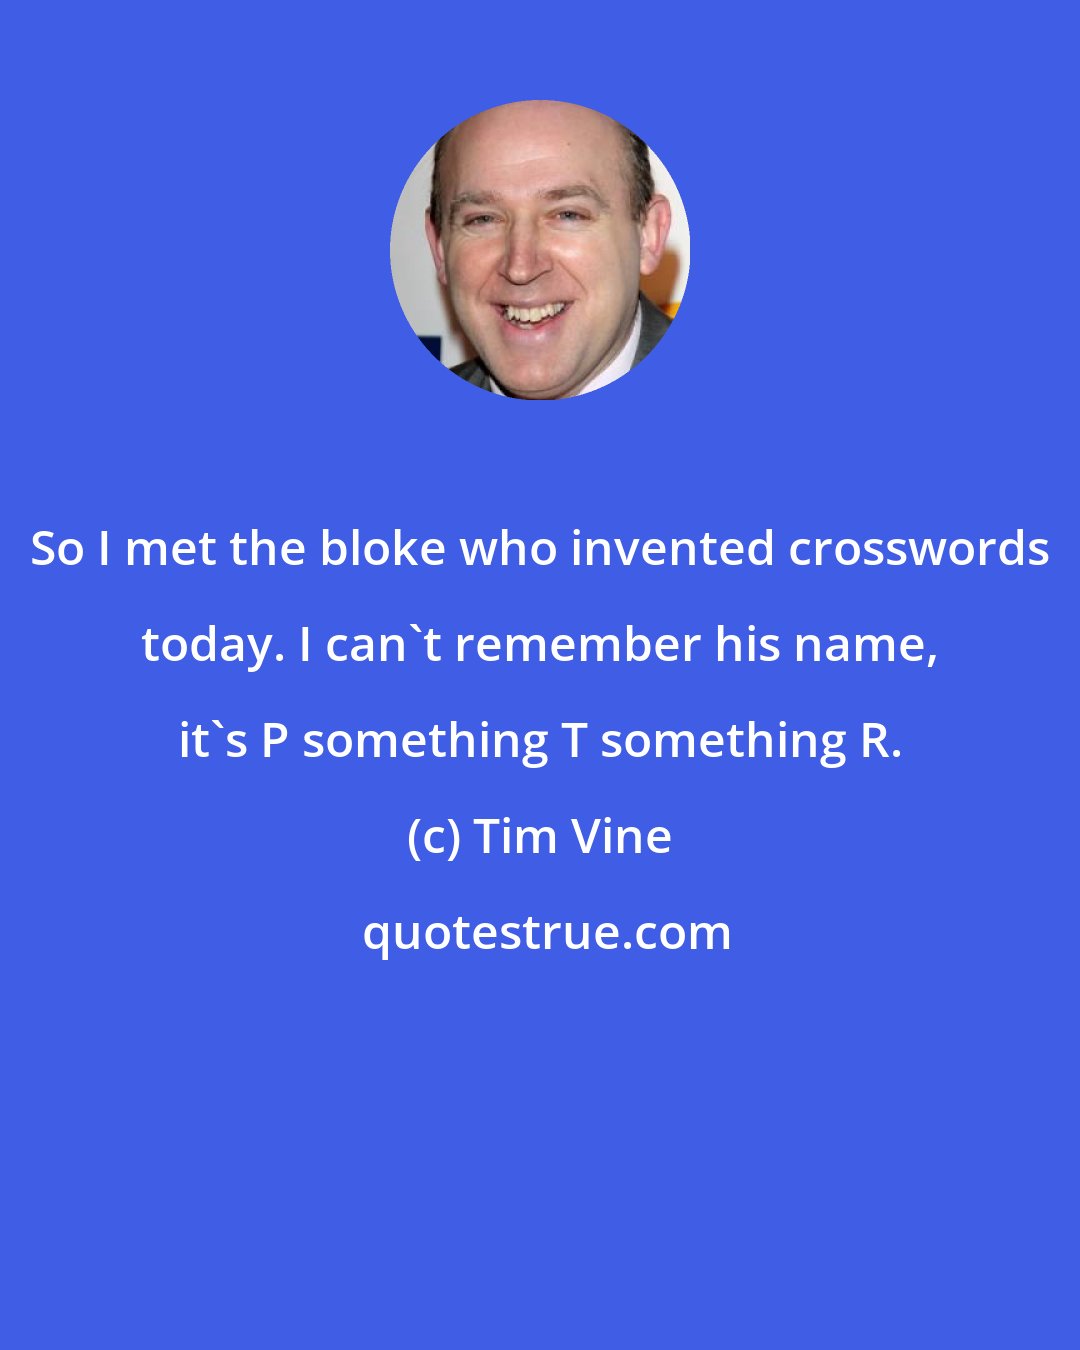 Tim Vine: So I met the bloke who invented crosswords today. I can't remember his name, it's P something T something R.